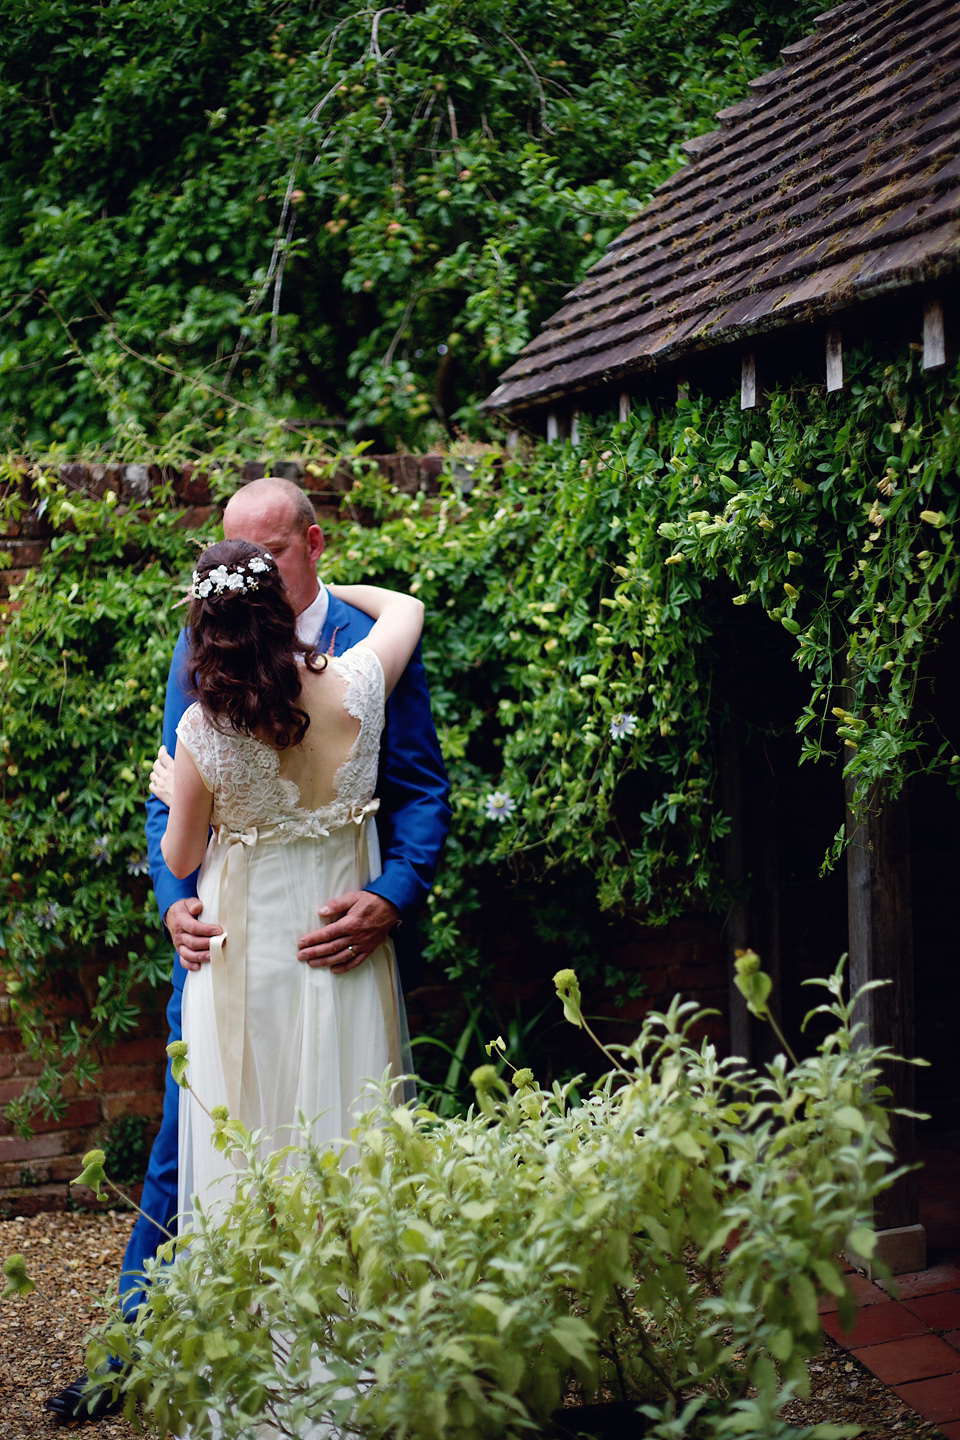 A Claire Pettibone dress for a British and French Summer garden party wedding. Photography by Lydia Stamps.